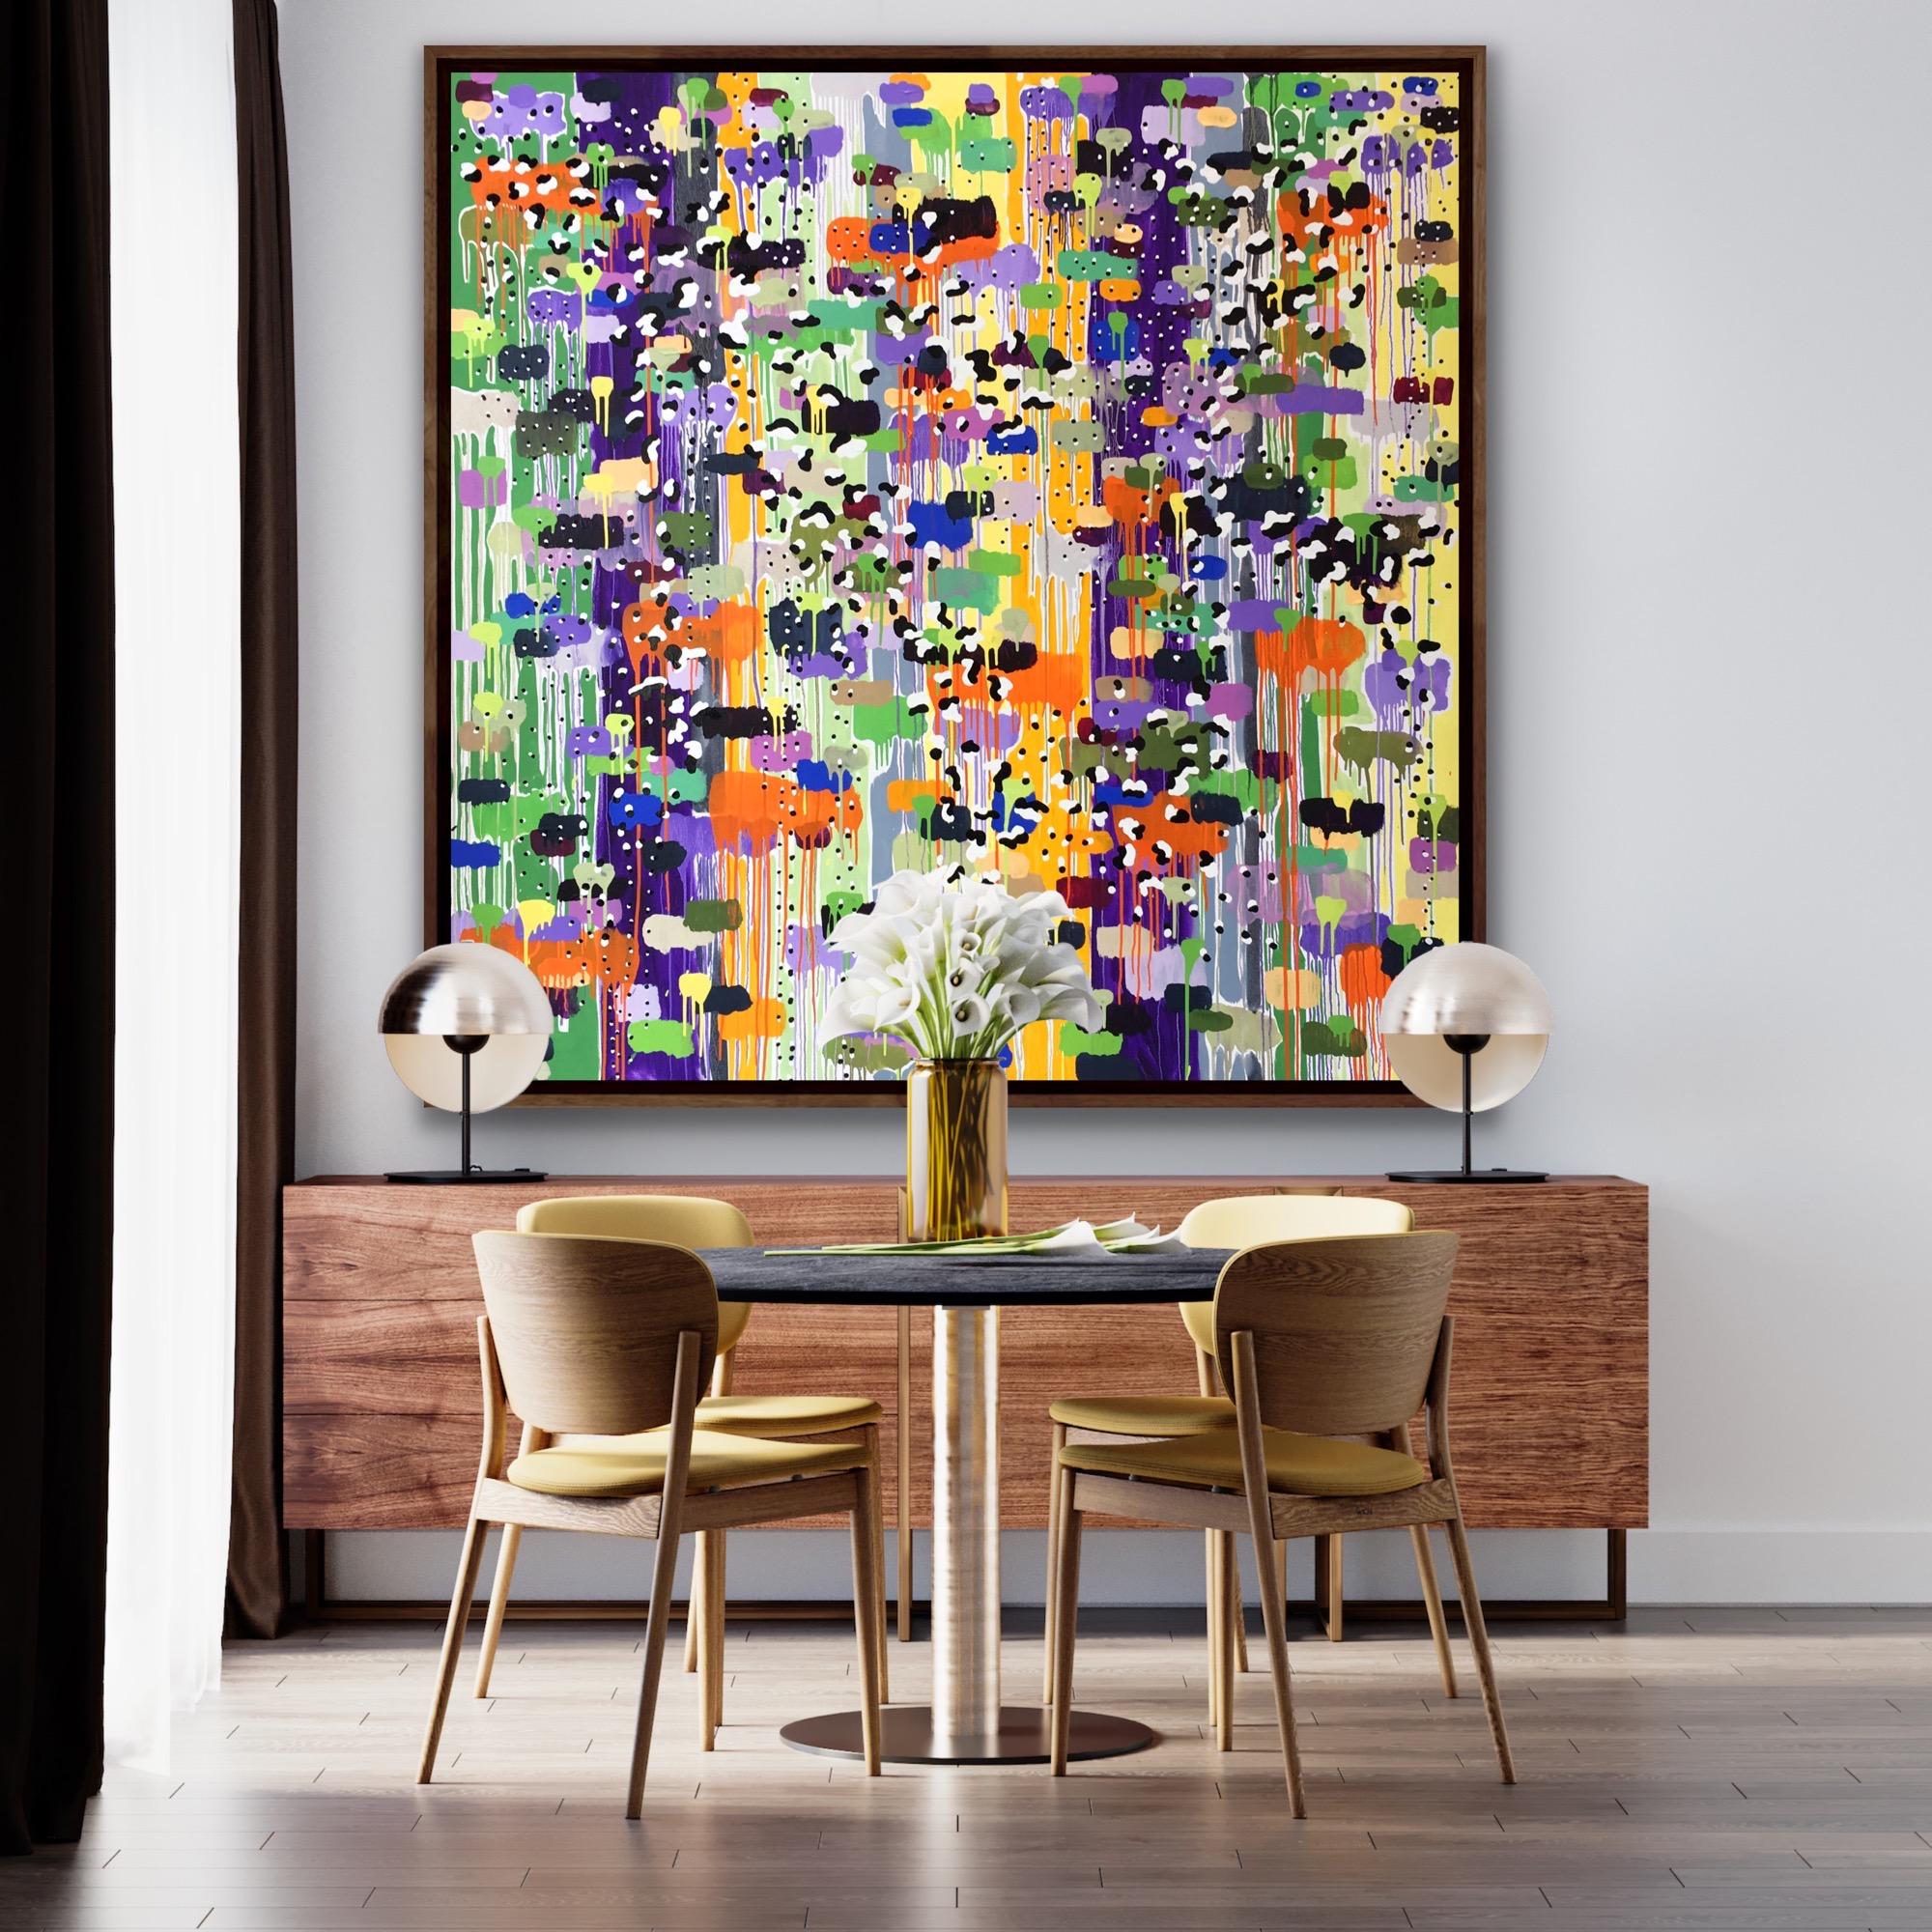 Dundonald Blossom, Original Abstract Painting, Large Bright Statement Artwork - Print by Robert Dunt